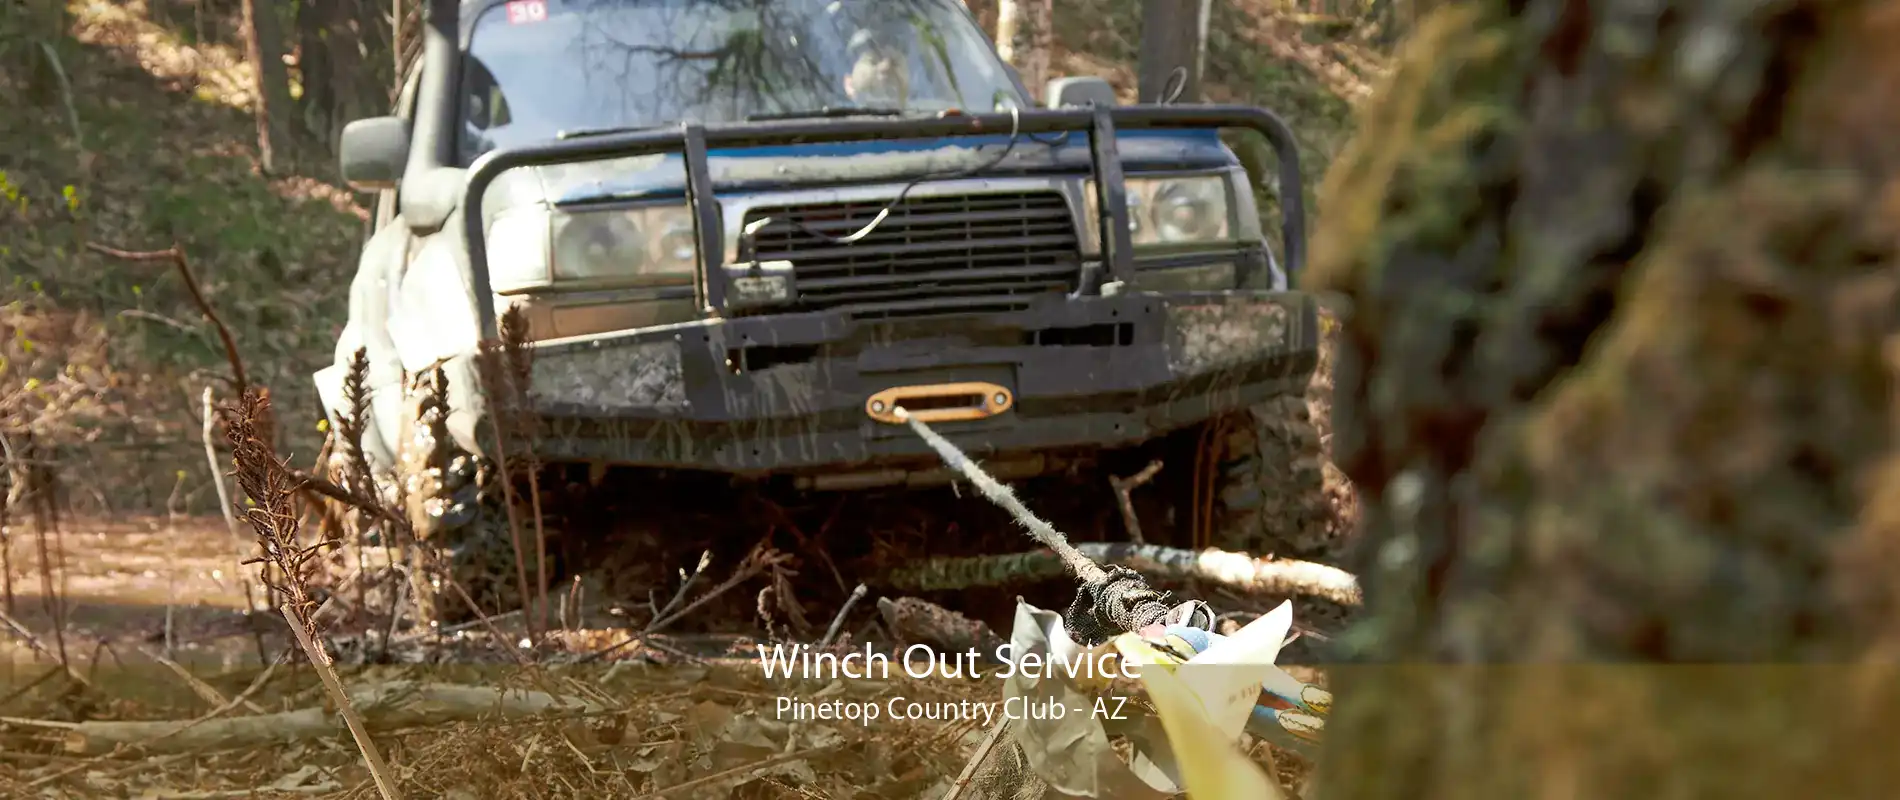 Winch Out Service Pinetop Country Club - AZ